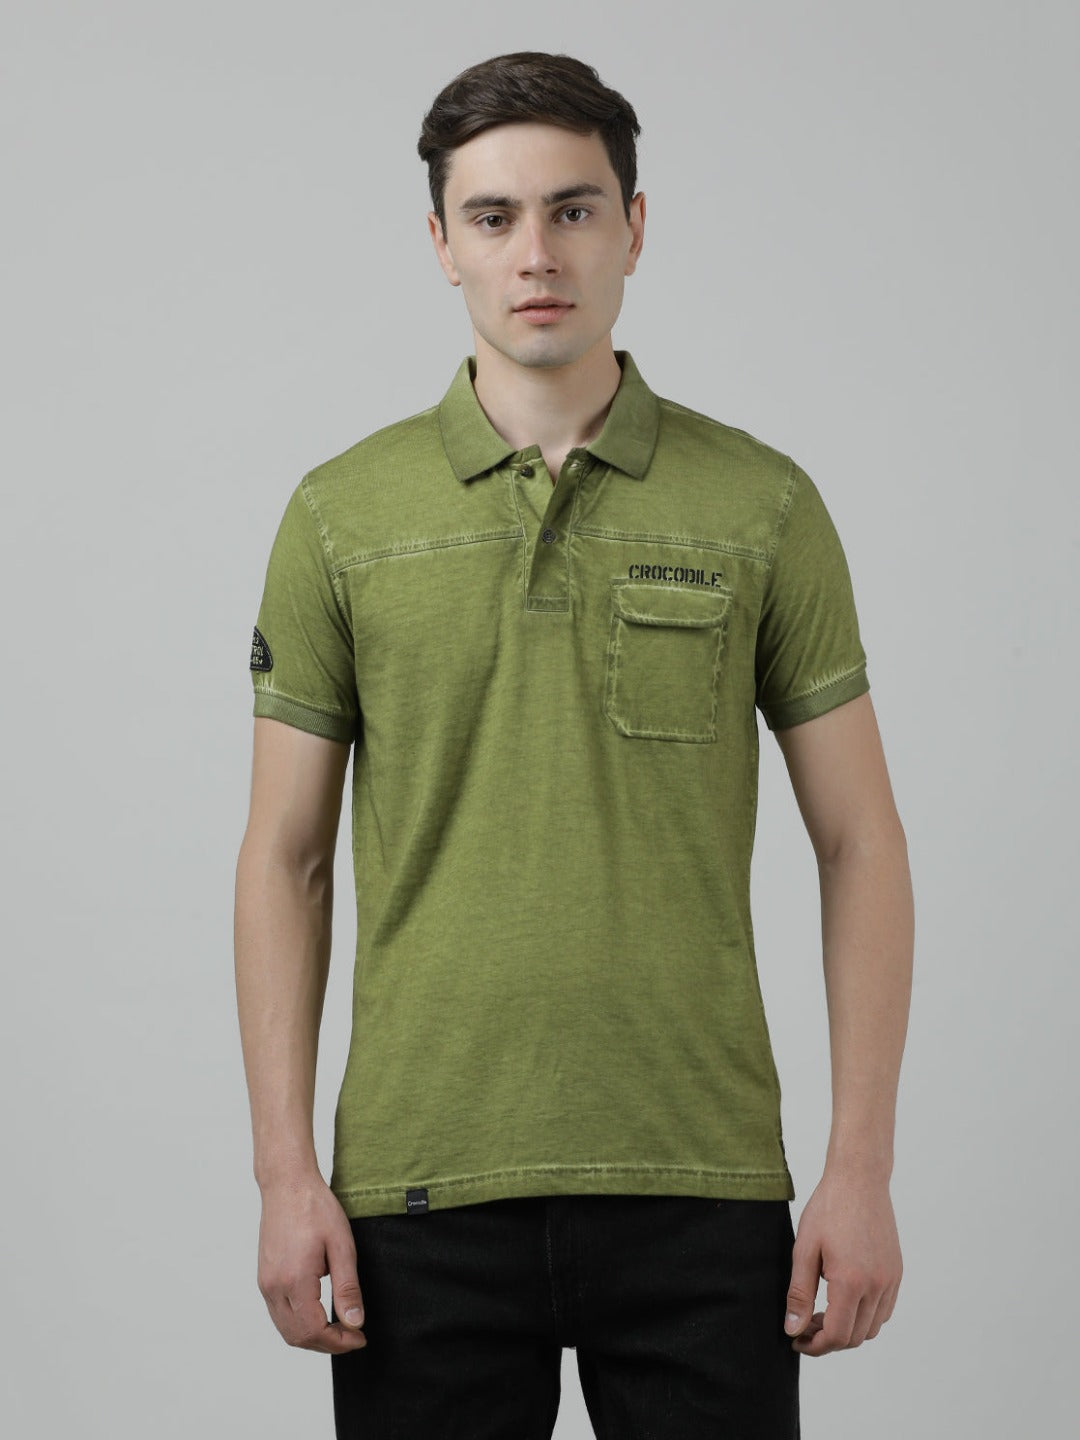 Casual Green T-Shirt Half Sleeve Slim Fit with Collar for Men